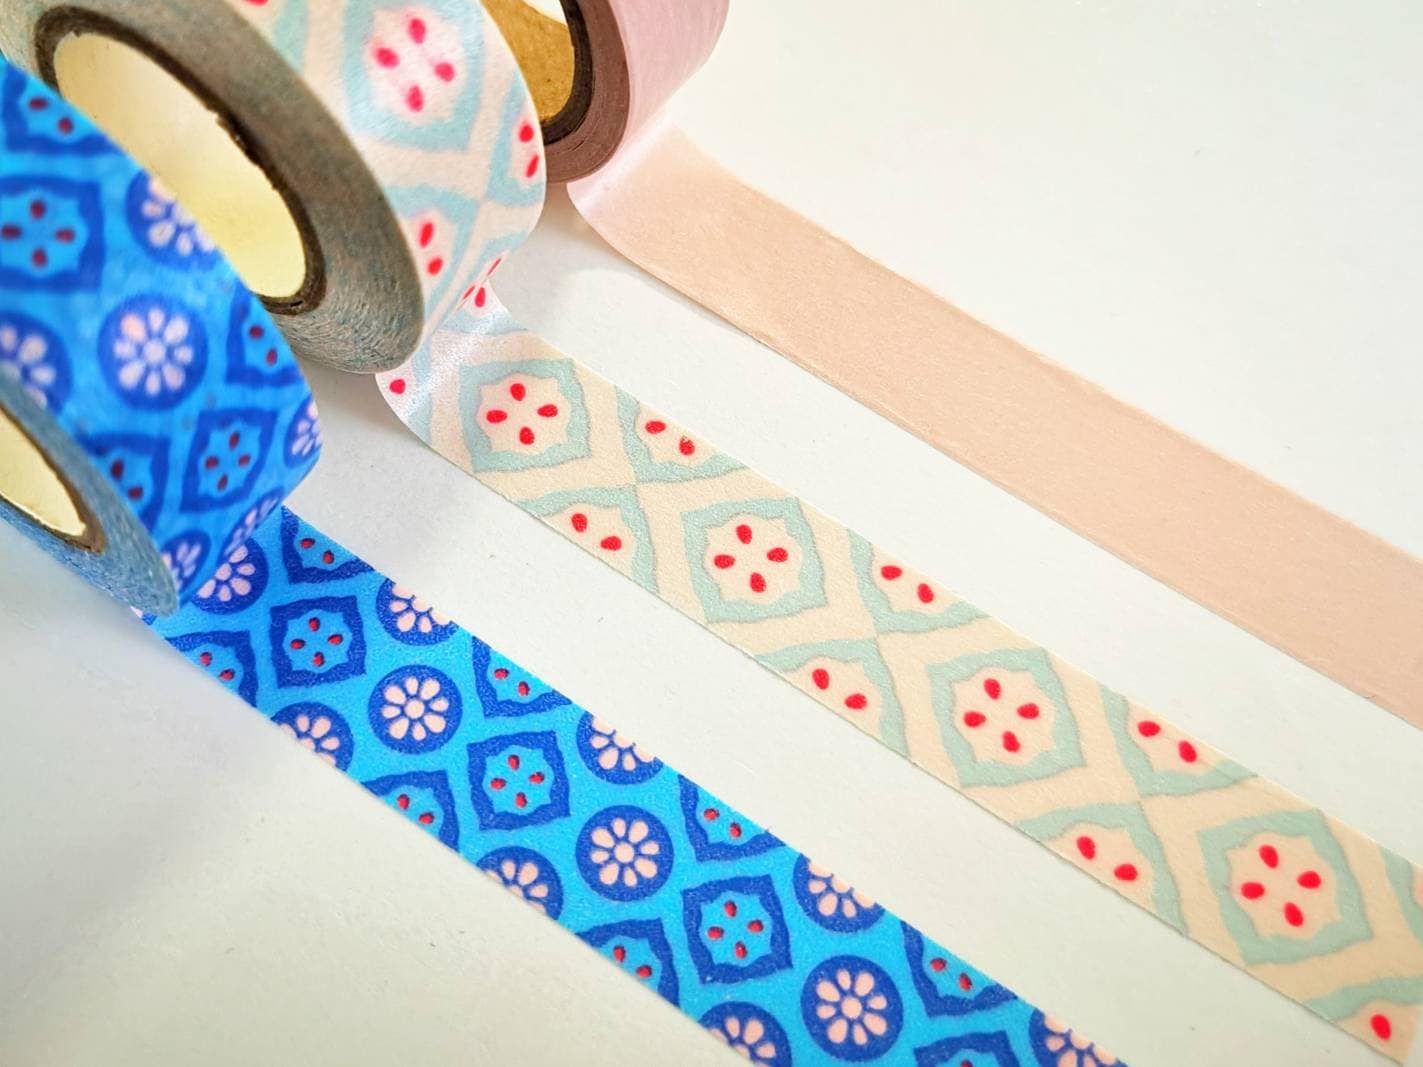 Washi tape - Grid pattern, brown - Roll of adhesive and decorative